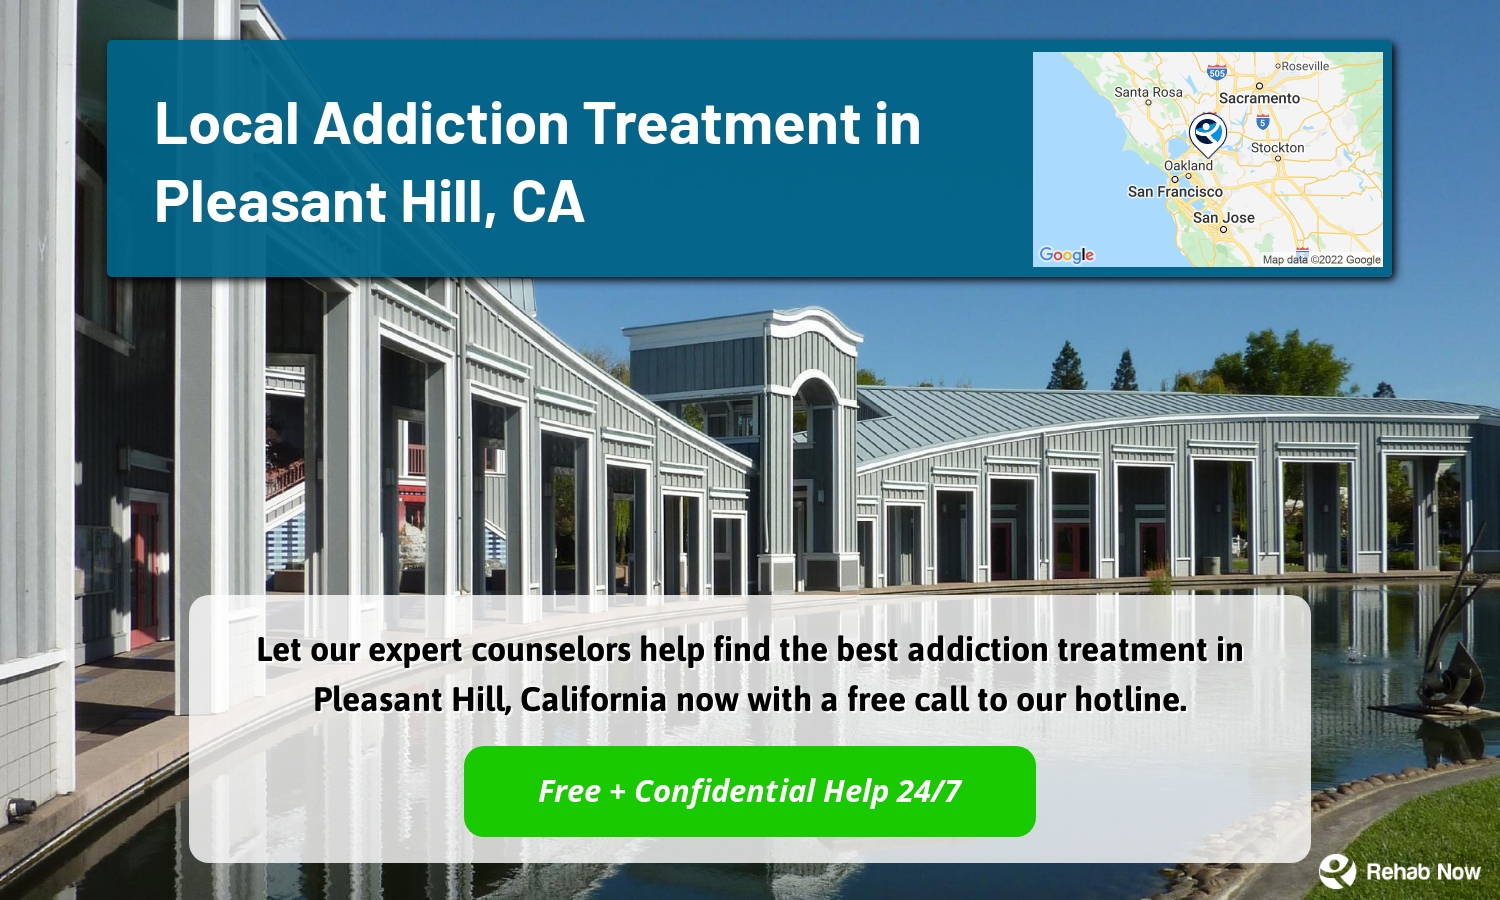 Let our expert counselors help find the best addiction treatment in Pleasant Hill, California now with a free call to our hotline.